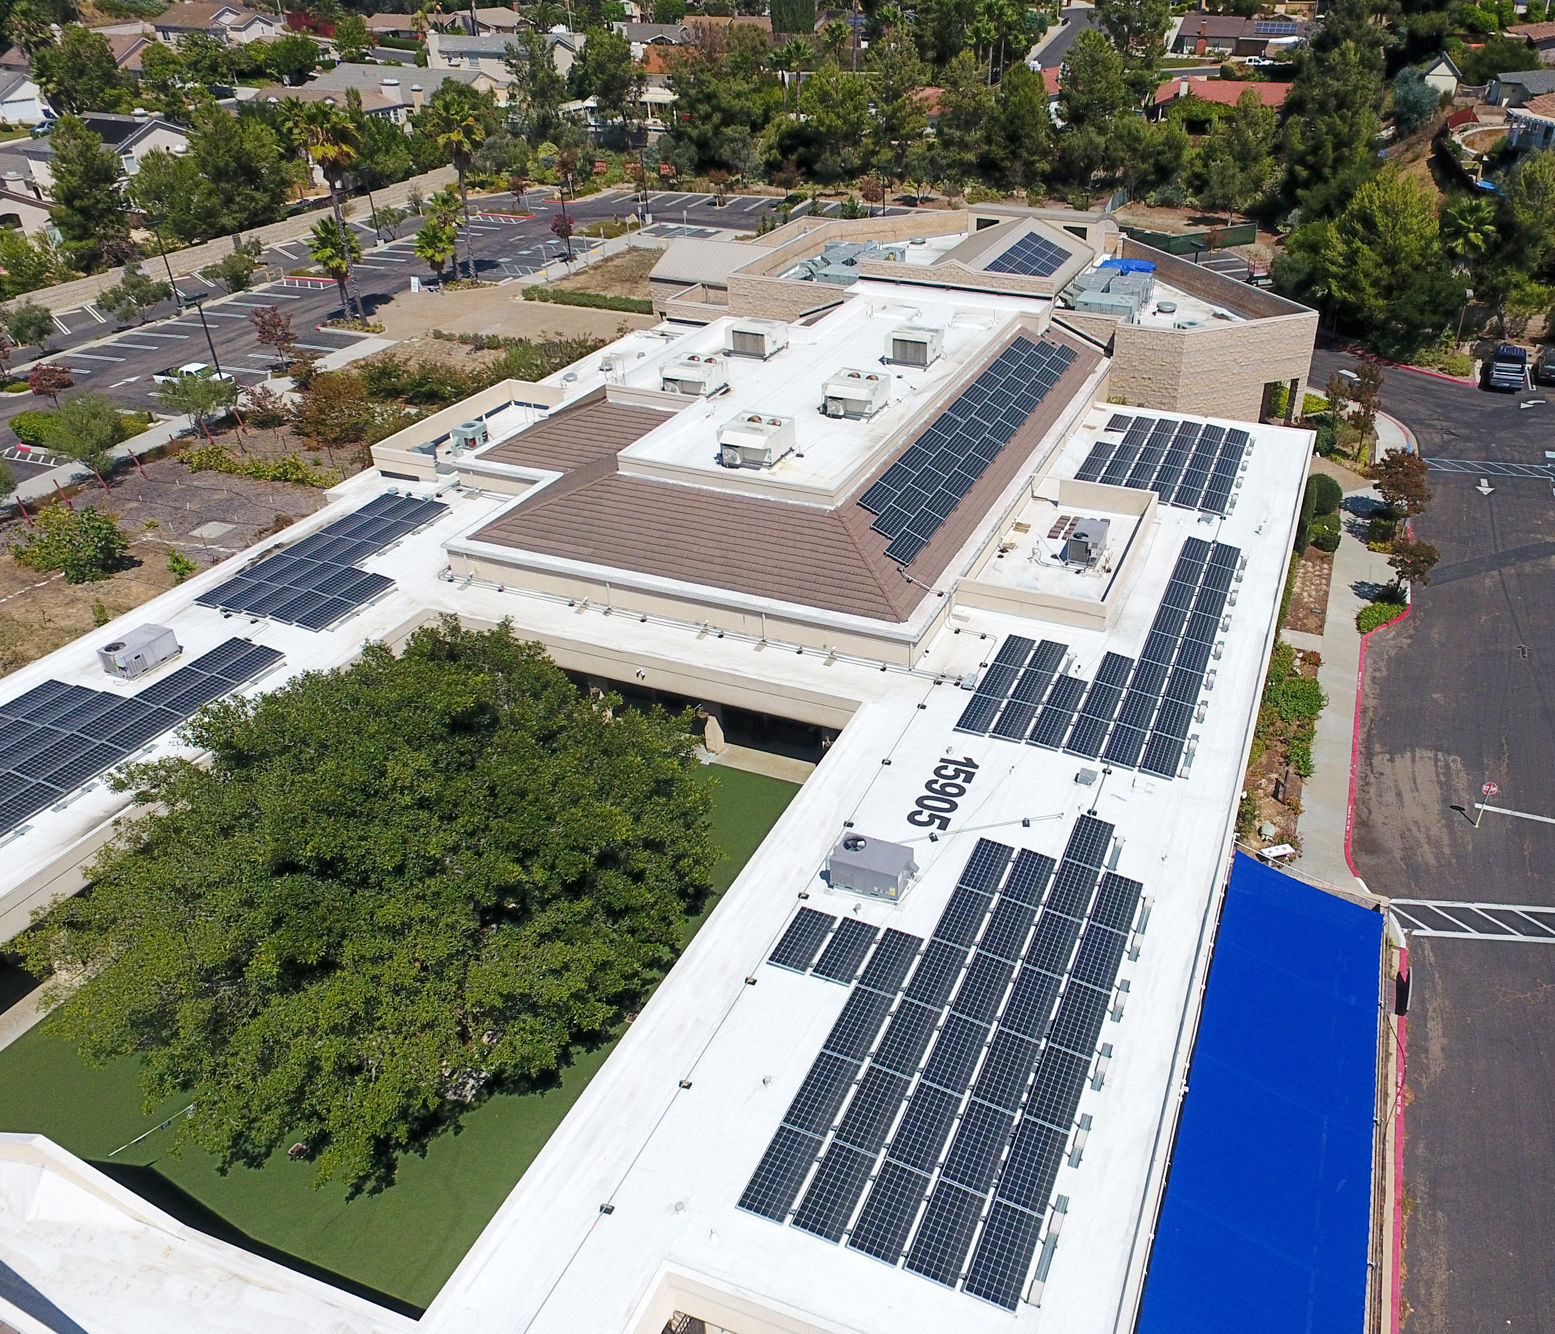 The Temple Adat Shalom solar project is in direct alignment with its commitment to fiscal responsibility and mission to fund education services and programs for the entire congregation.